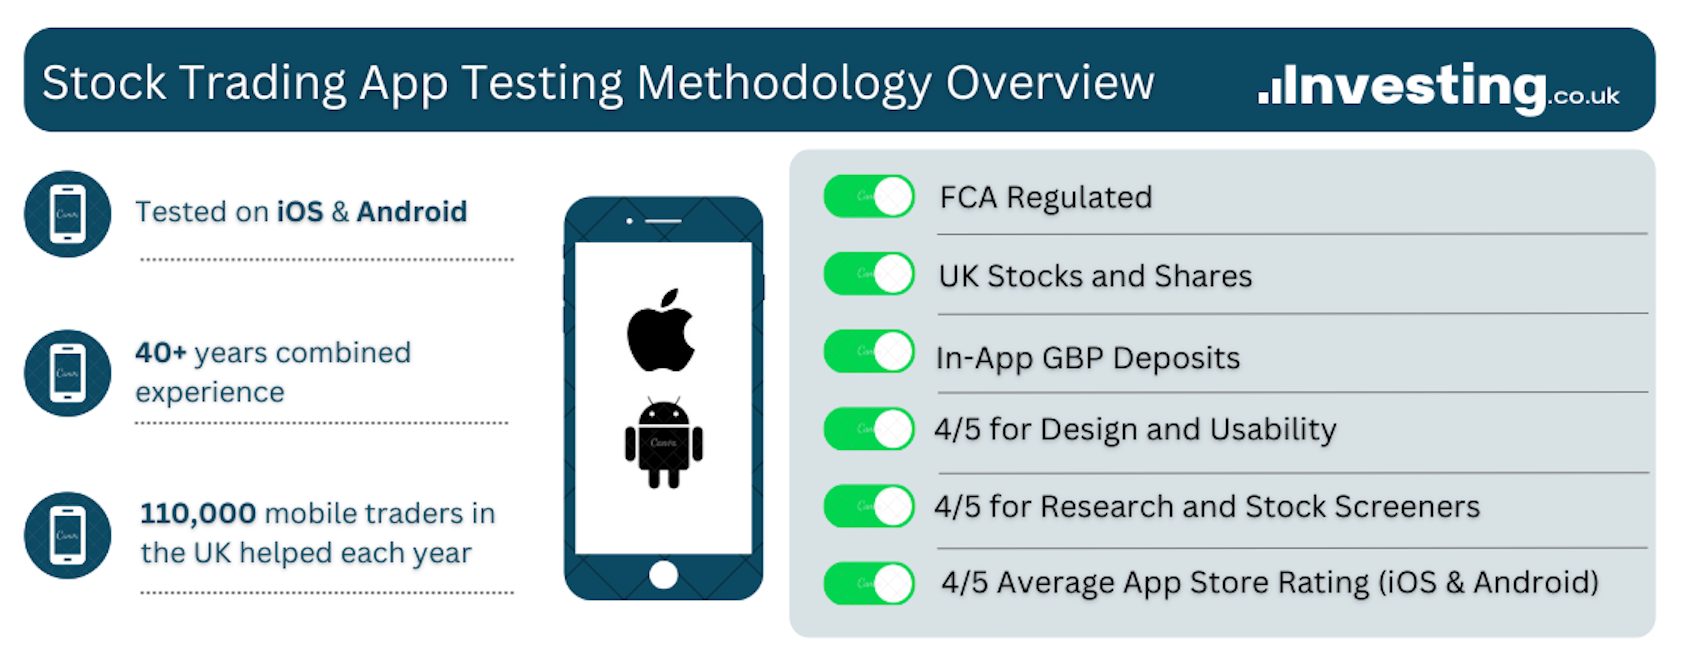 Infographic showing Investing.co.uk stock trading app testing approach 